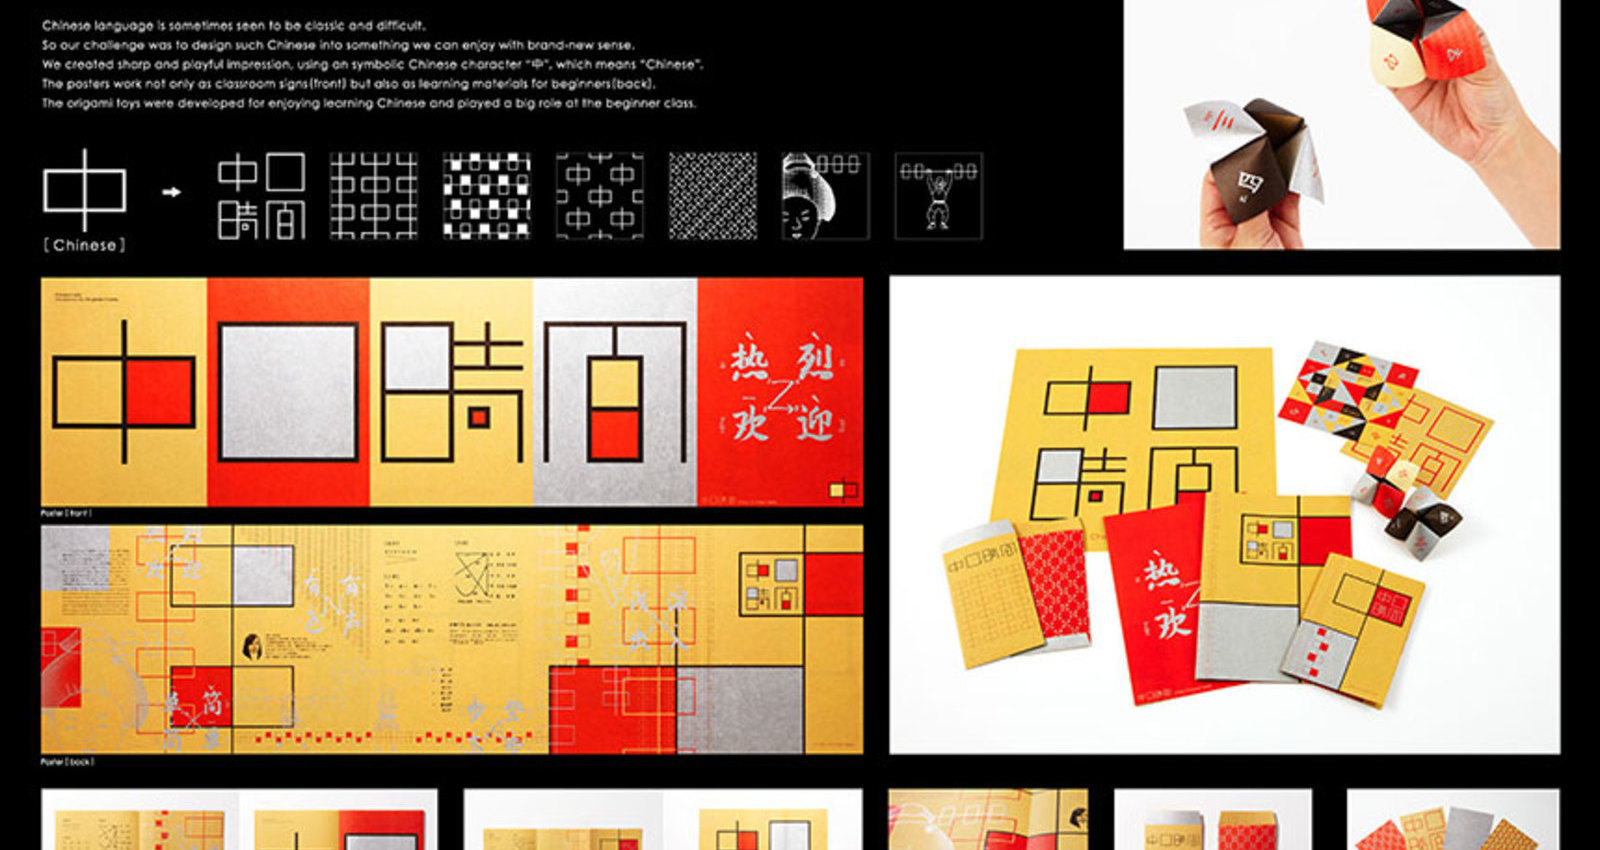 Playful Chinese - Materials for Chinese Class